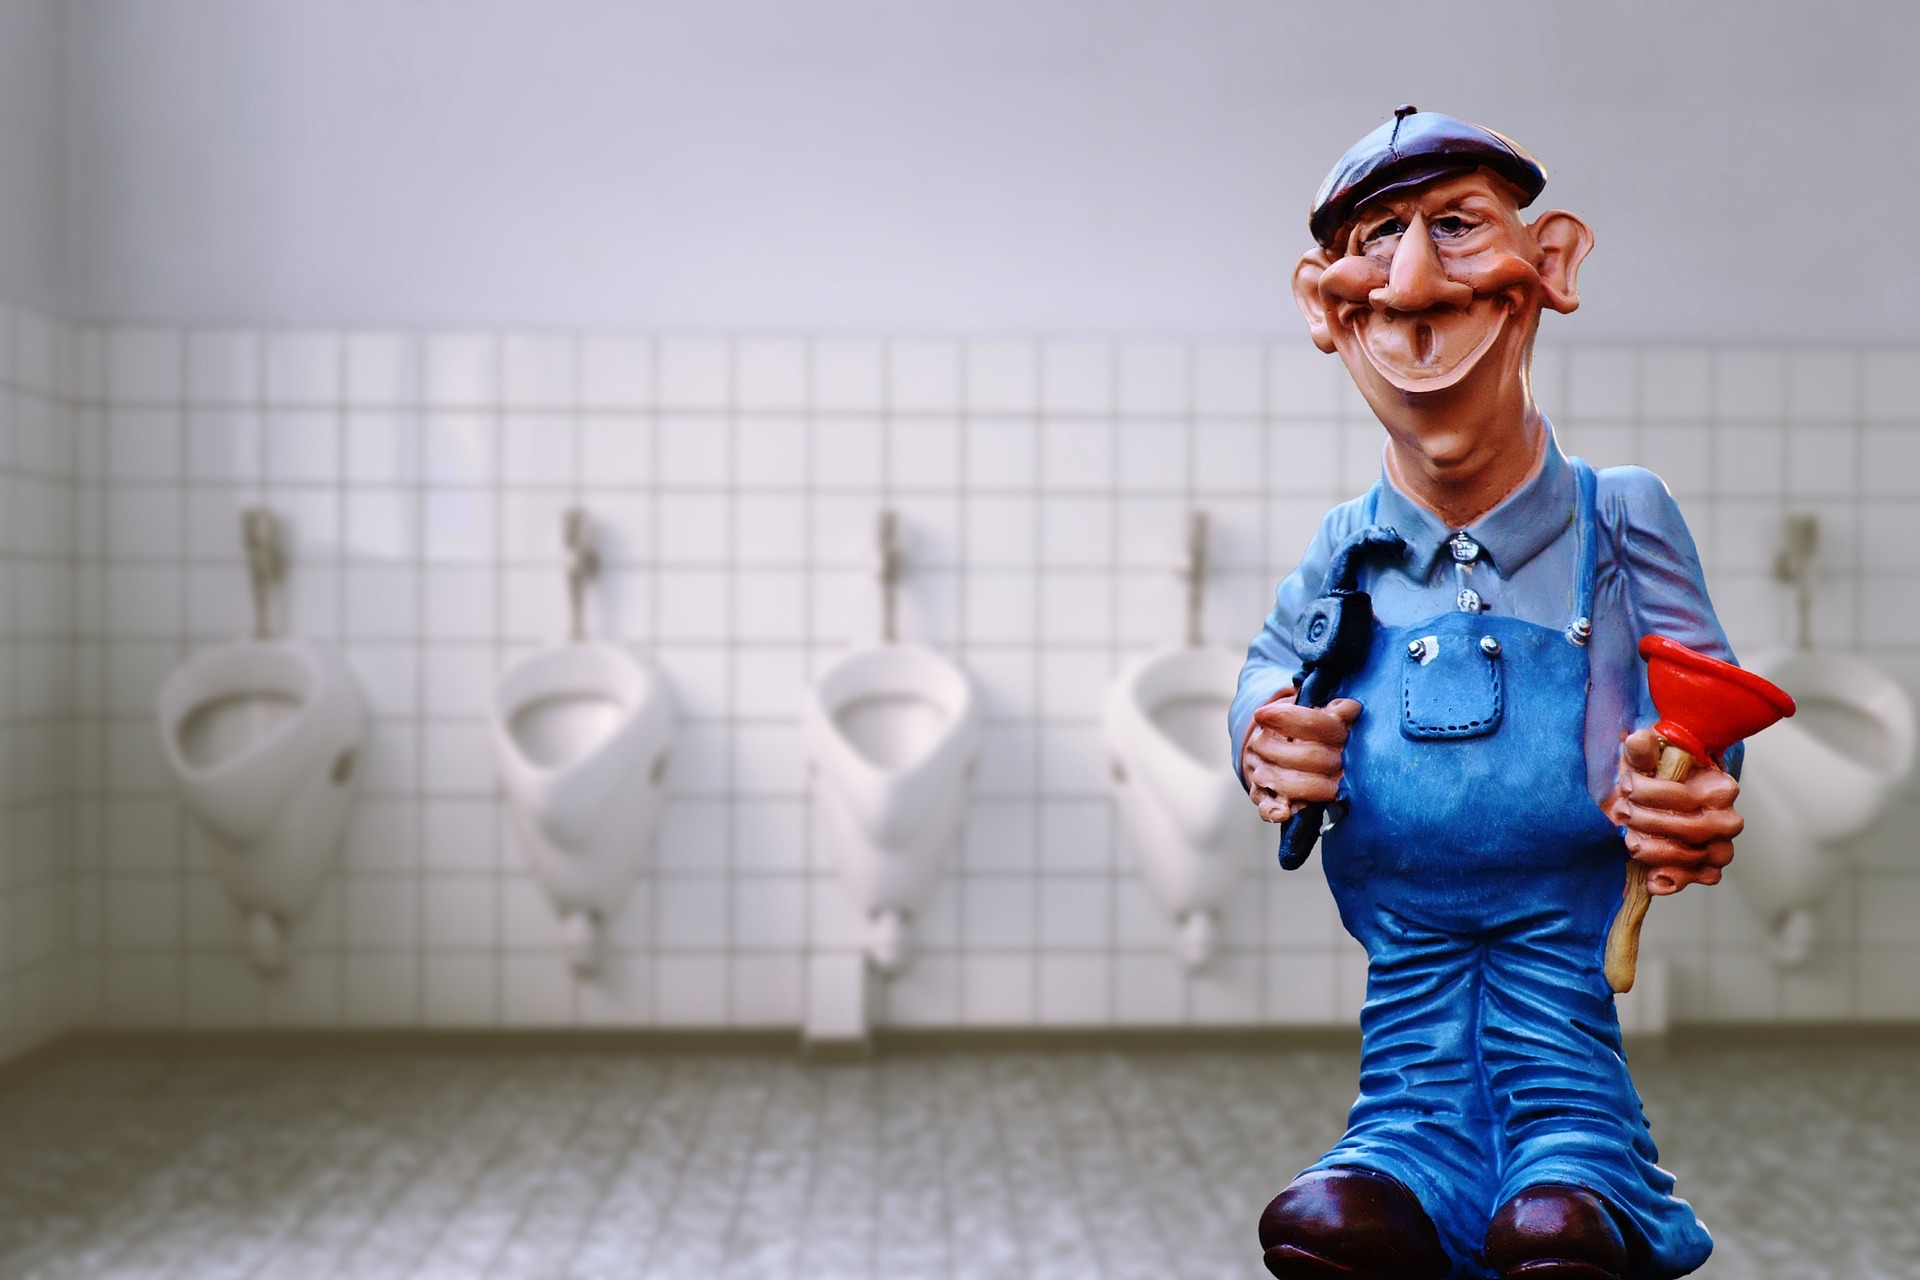 What do plumbers think about the plumbing profession in the next 10 years?